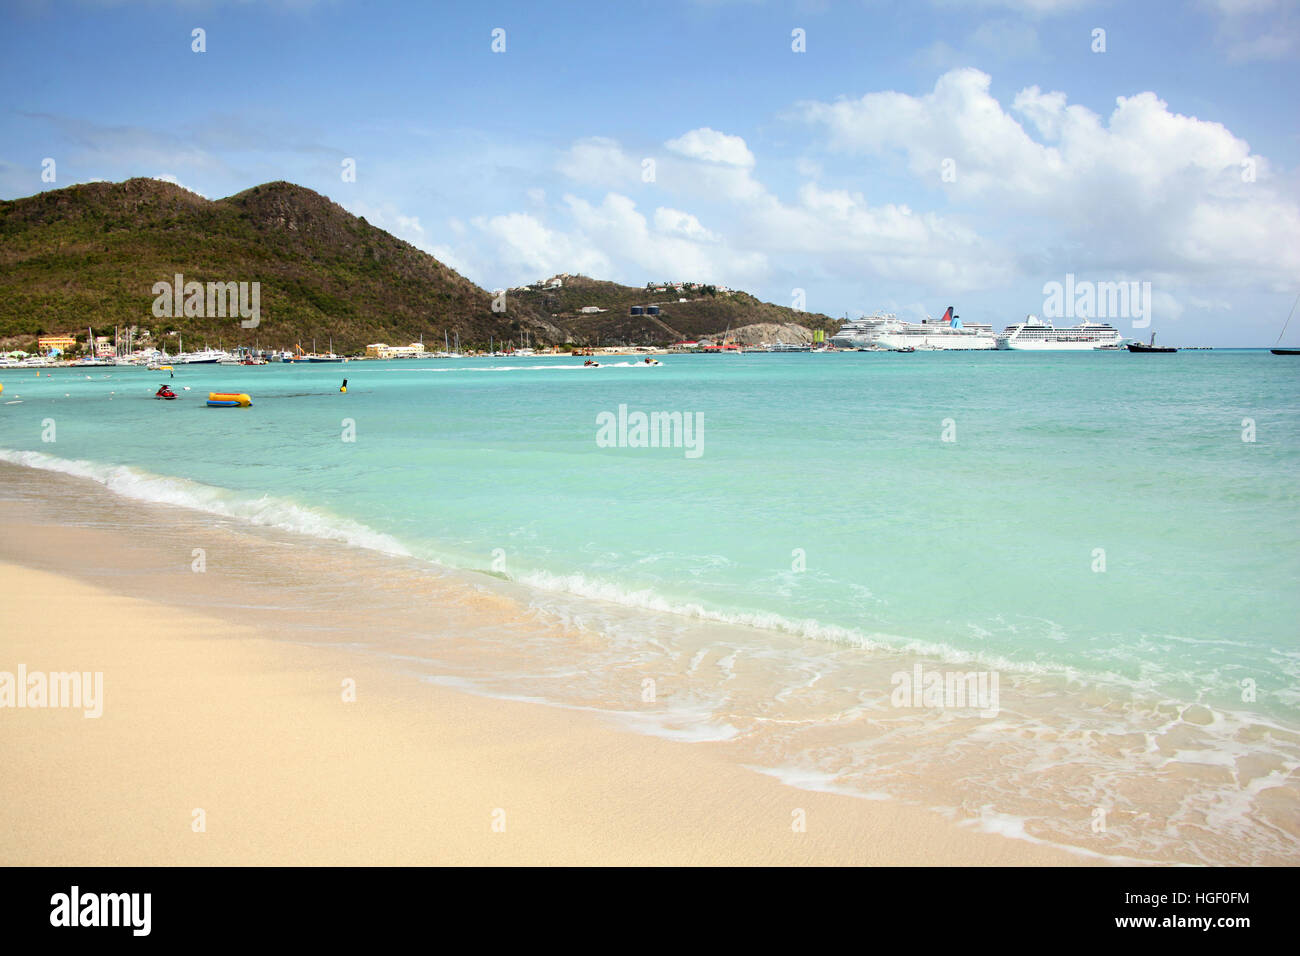 Beautiful Philipsburg beach with golden sand & turquoise water. Cruise ships in the distance, St Maarten, Caribbean. Stock Photo